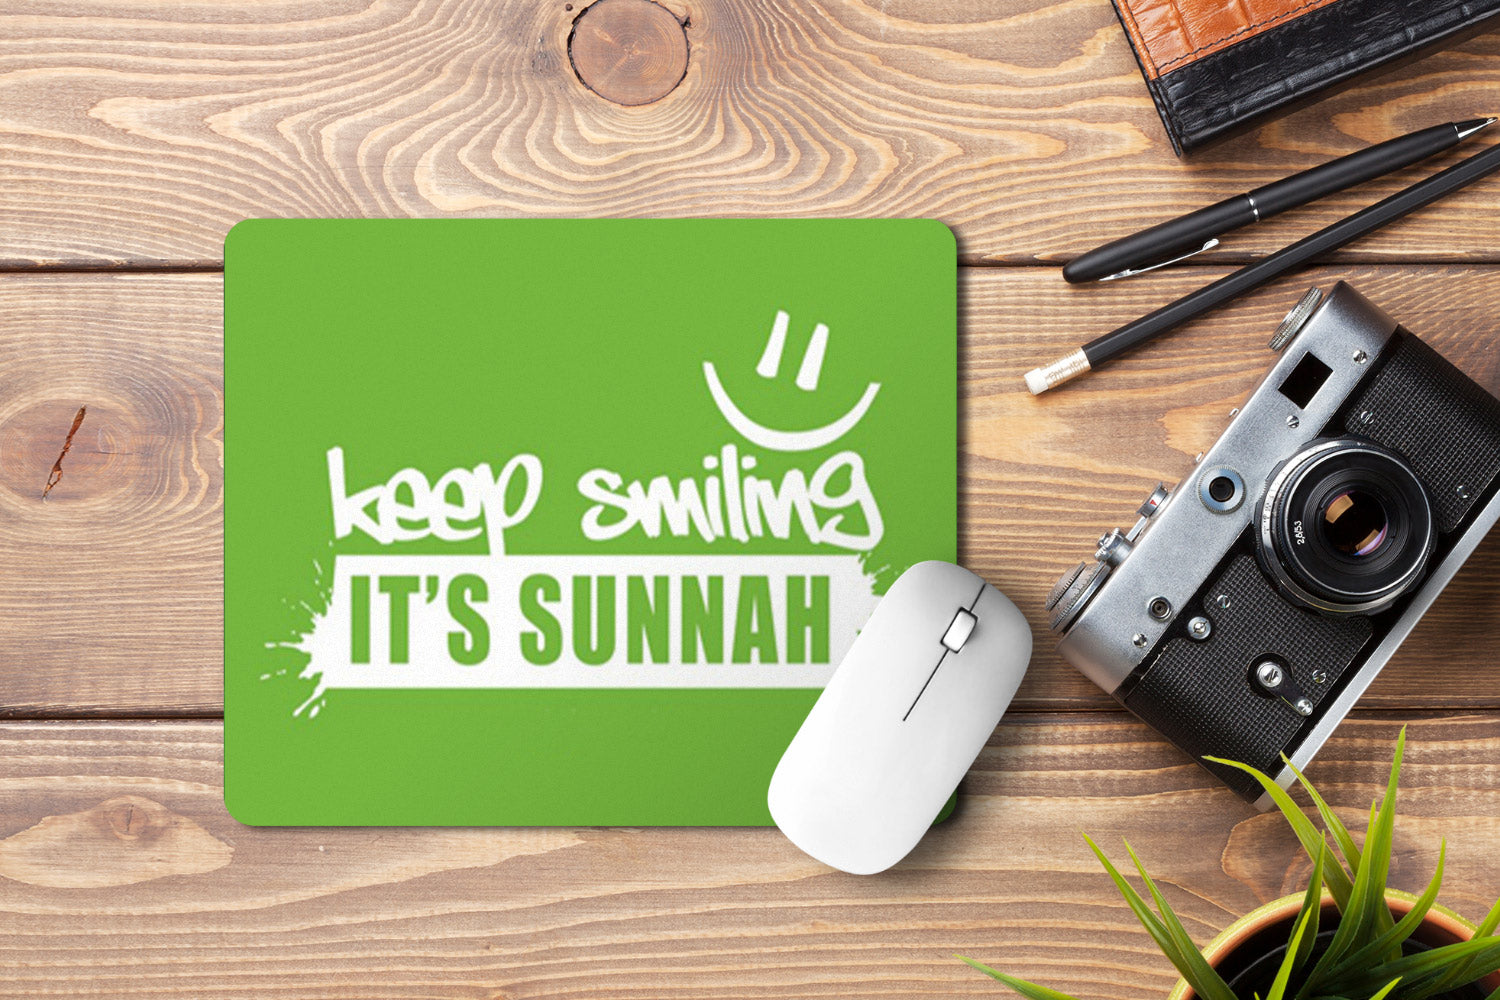 Keep smiling It's Sunnah' Printed Non-Slip Rubber Base Mouse Pad for Laptop, PC, Computer.